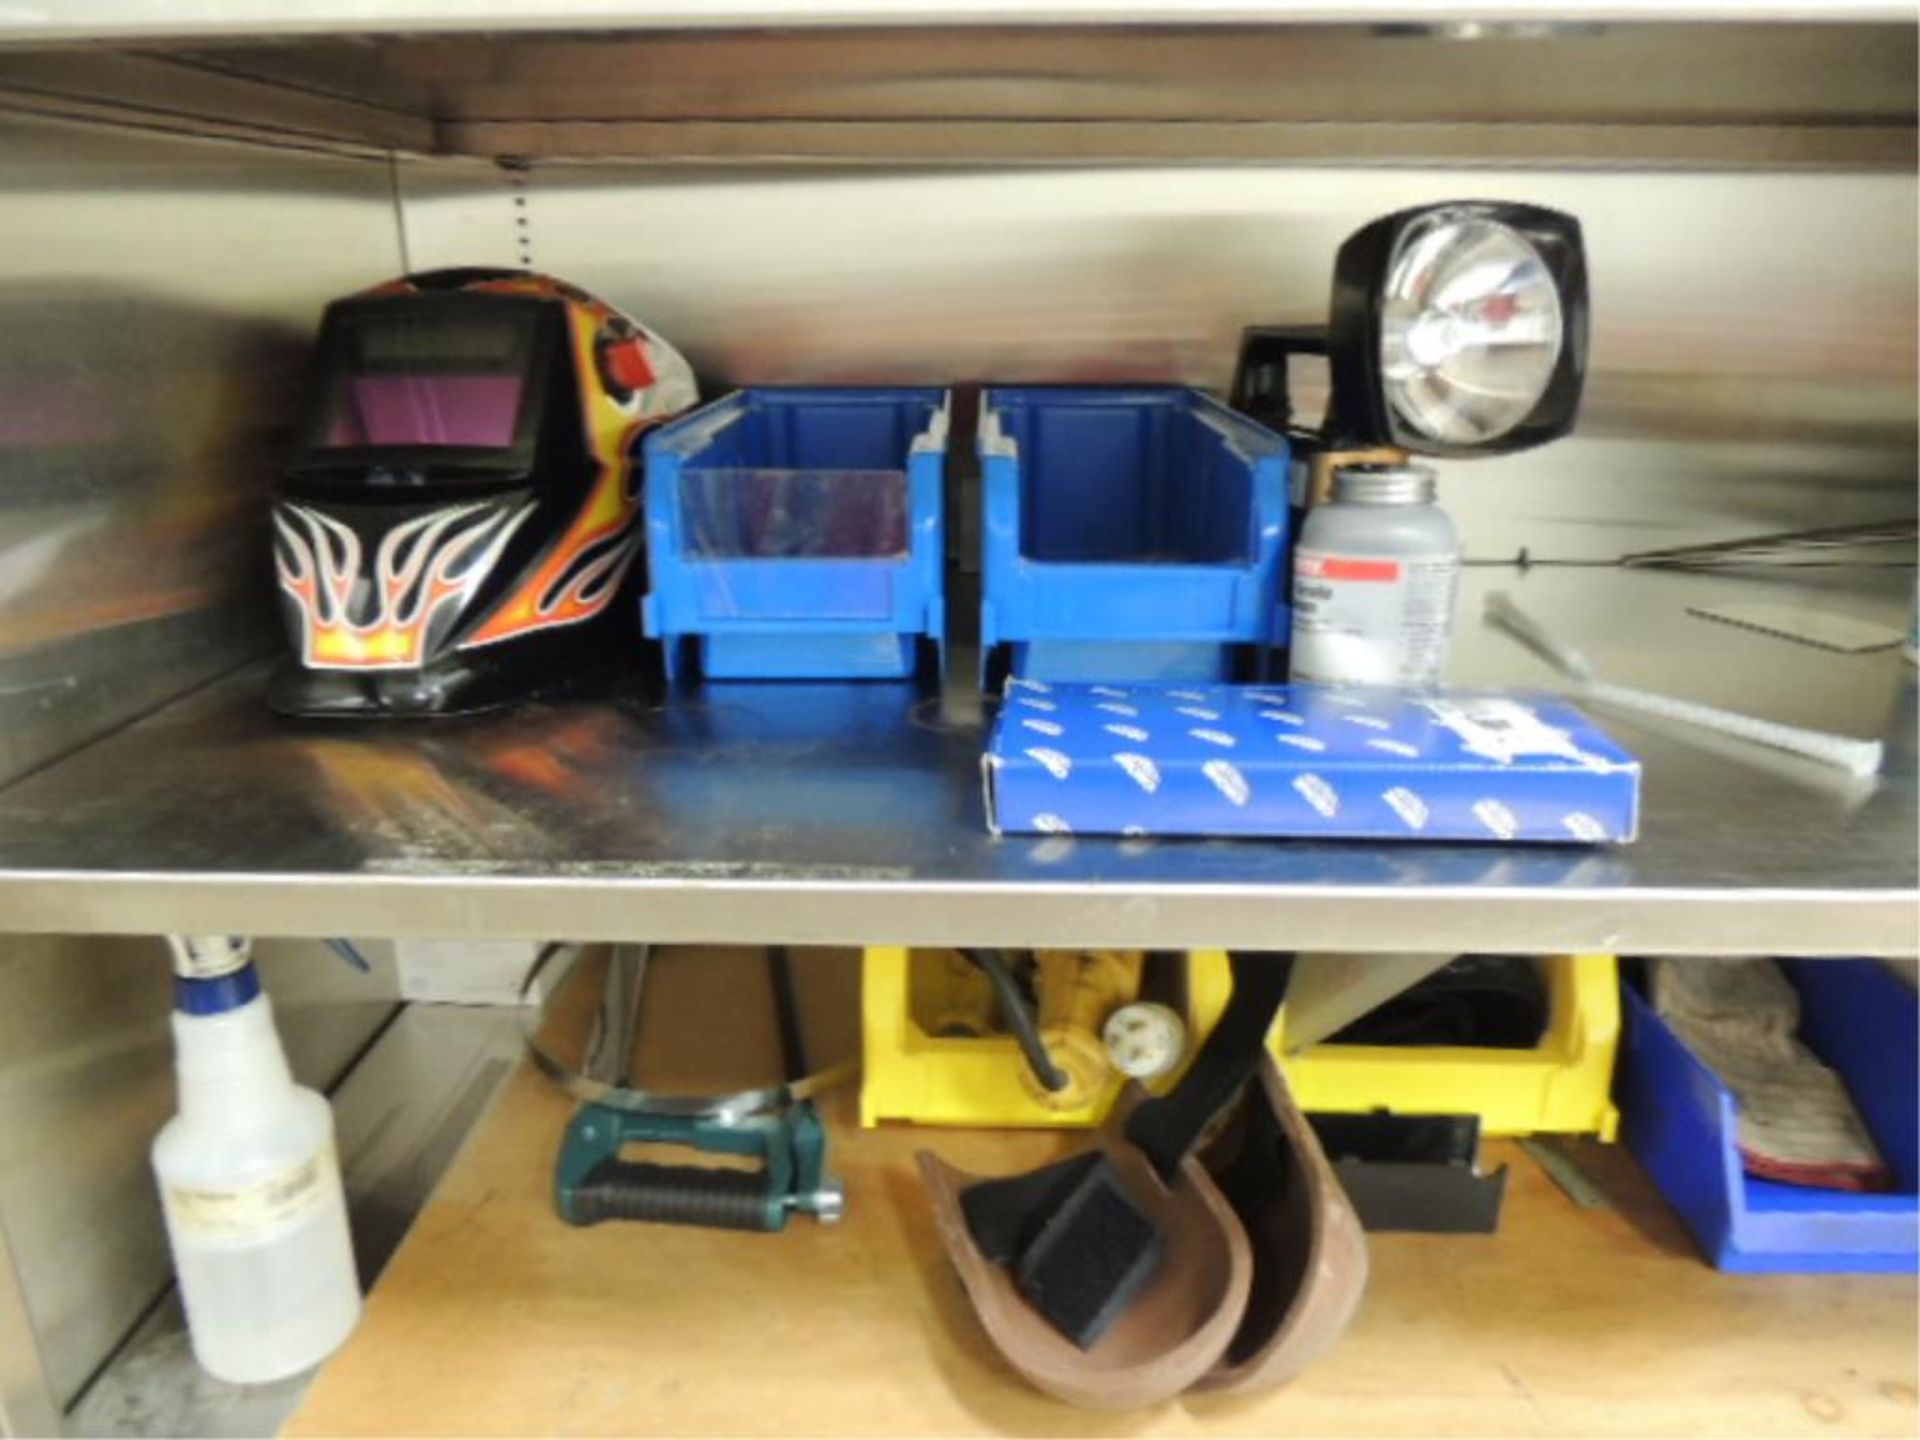 Storage cabinets; 47"x24"x80", SS two door and contents, air hoses, welding shield, Ridgid 3+6" - Image 4 of 10